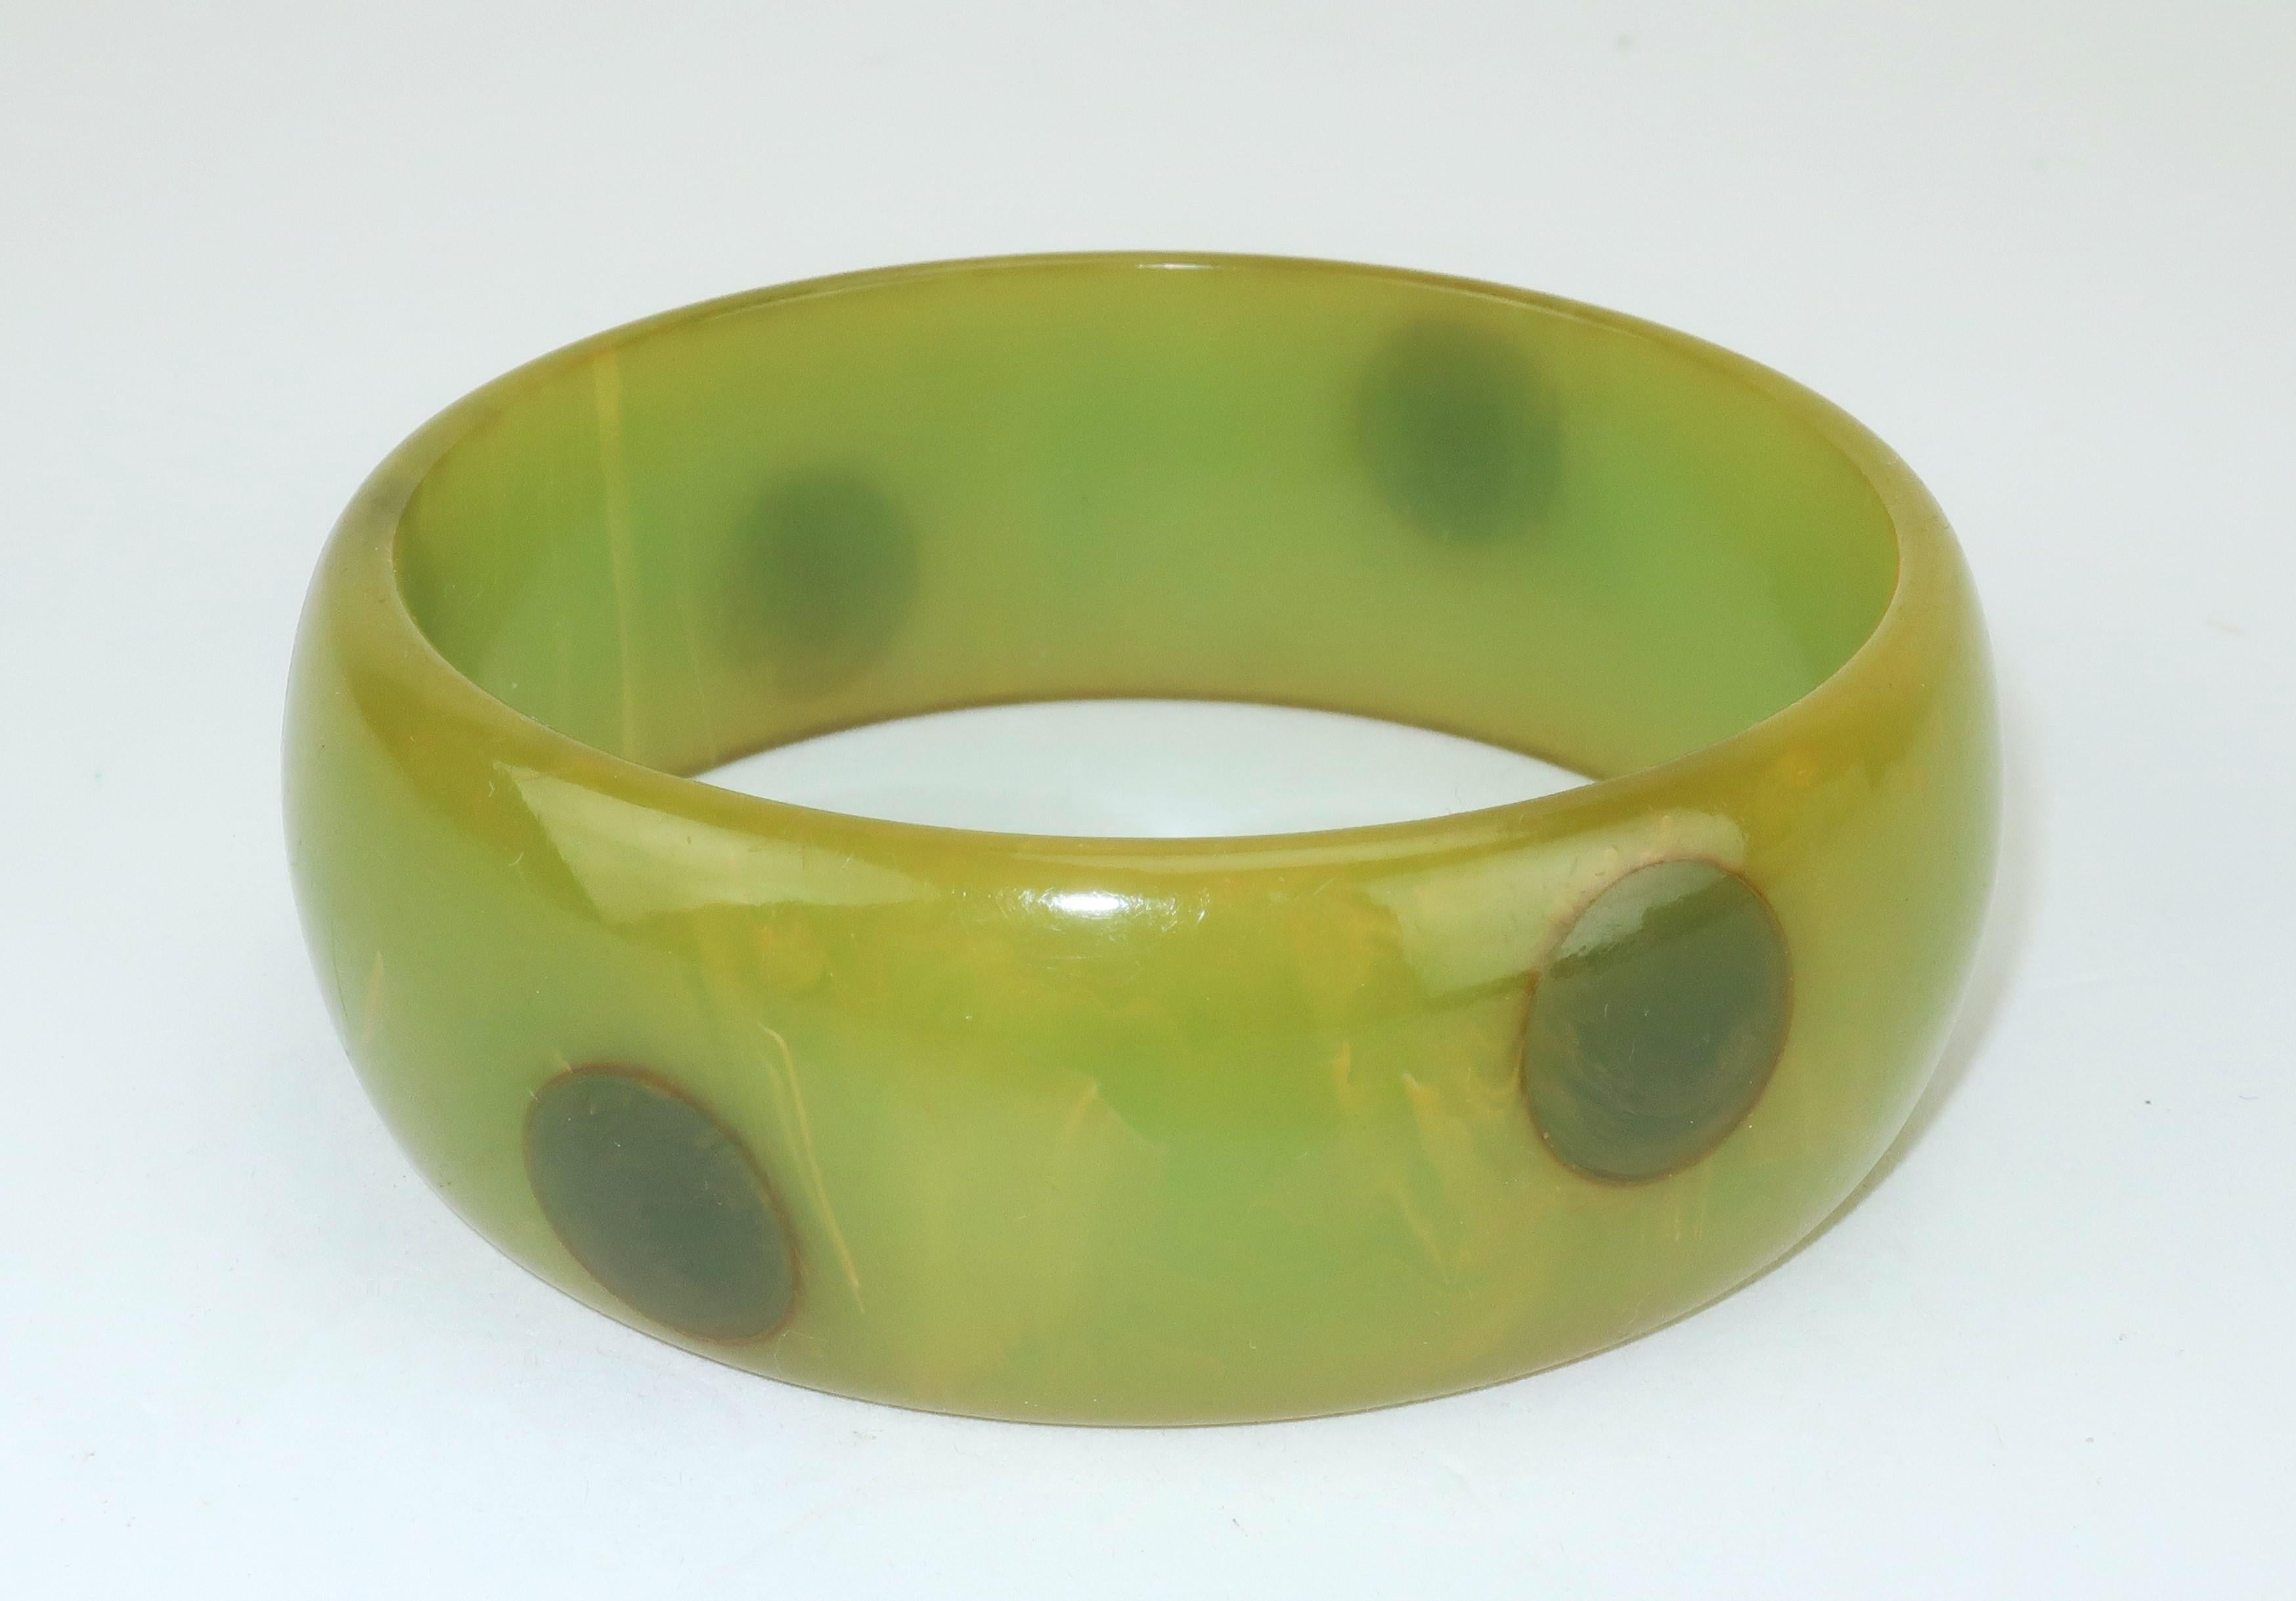 1940's bakelite bangle bracelet in shades of green ranging from olive to forest with a marbleized effect incorporating a touch of yellow.  The bracelet is decorated with a polka dot pattern similar to 'confetti' or 'gum drop' styles.  It is fun to